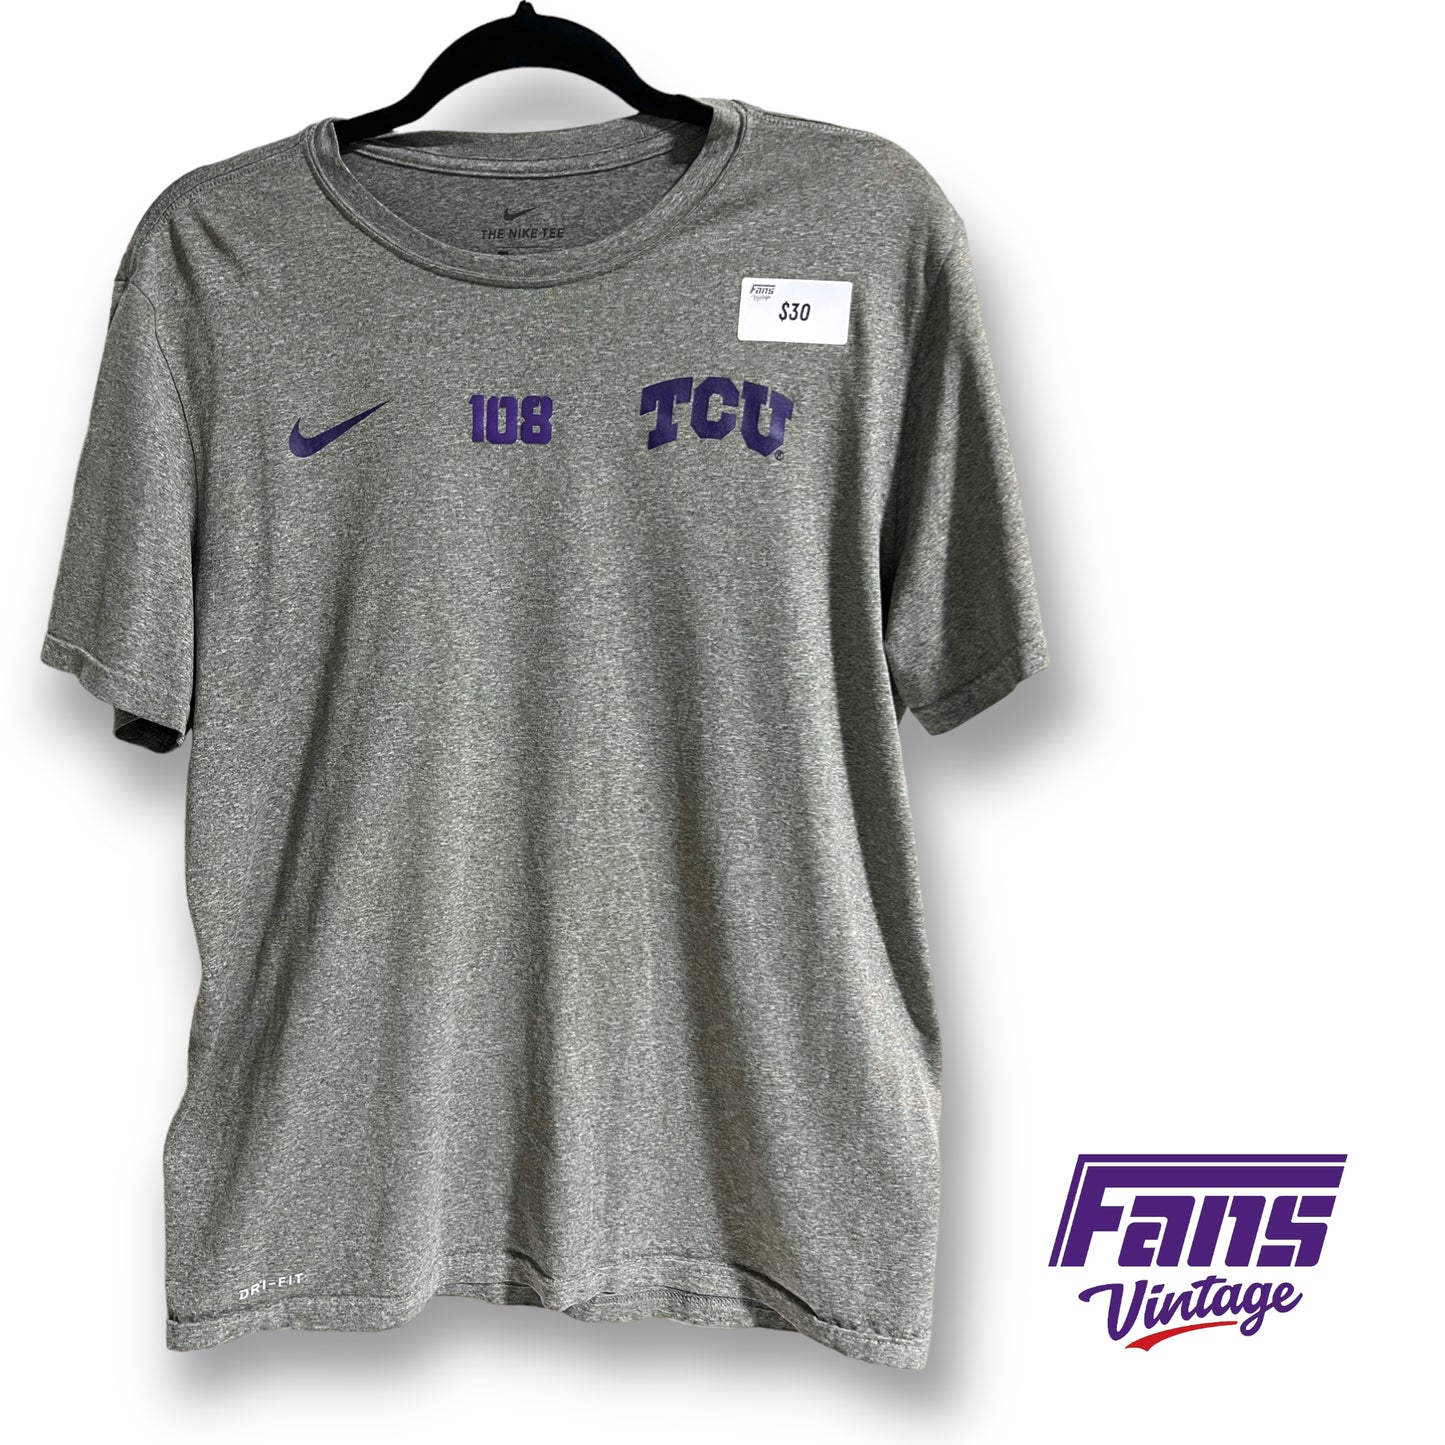 Nike TCU team issued numbered workout shirt